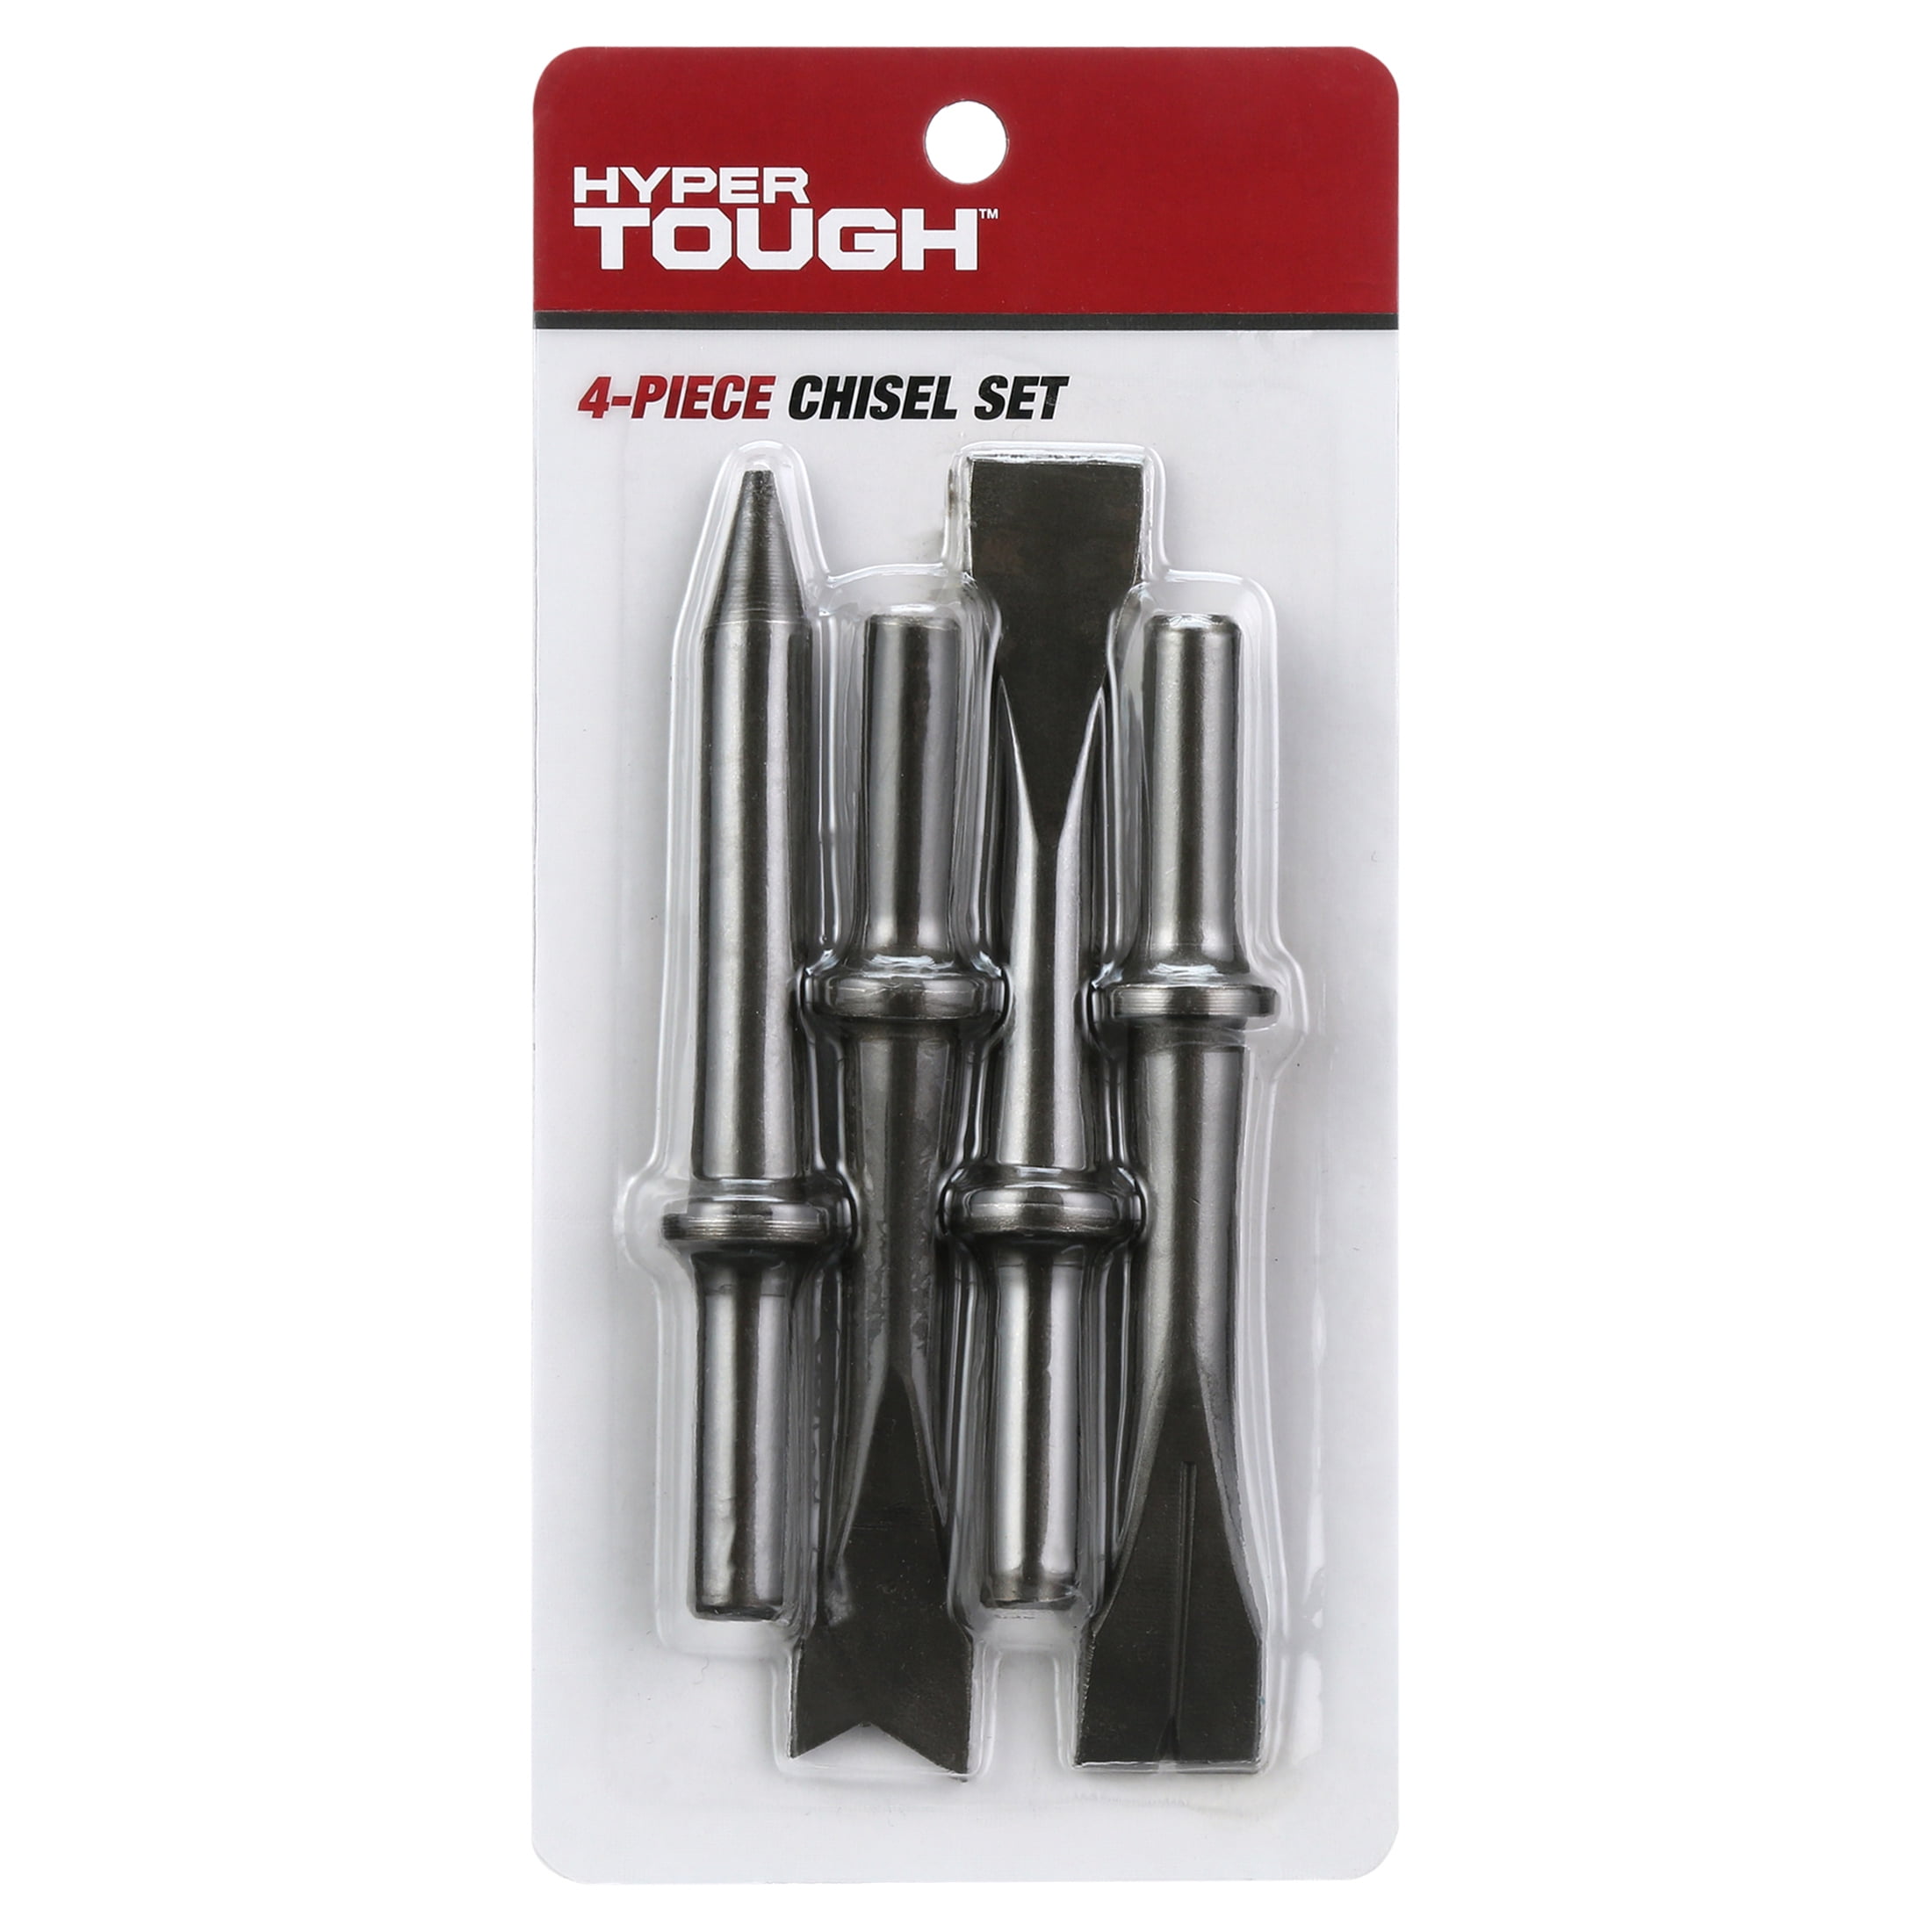 Four Chisel Set - ¼, ½, ¾, &1 - Overall Length 9 - RC Hardness 57-59 by Garrett Wade